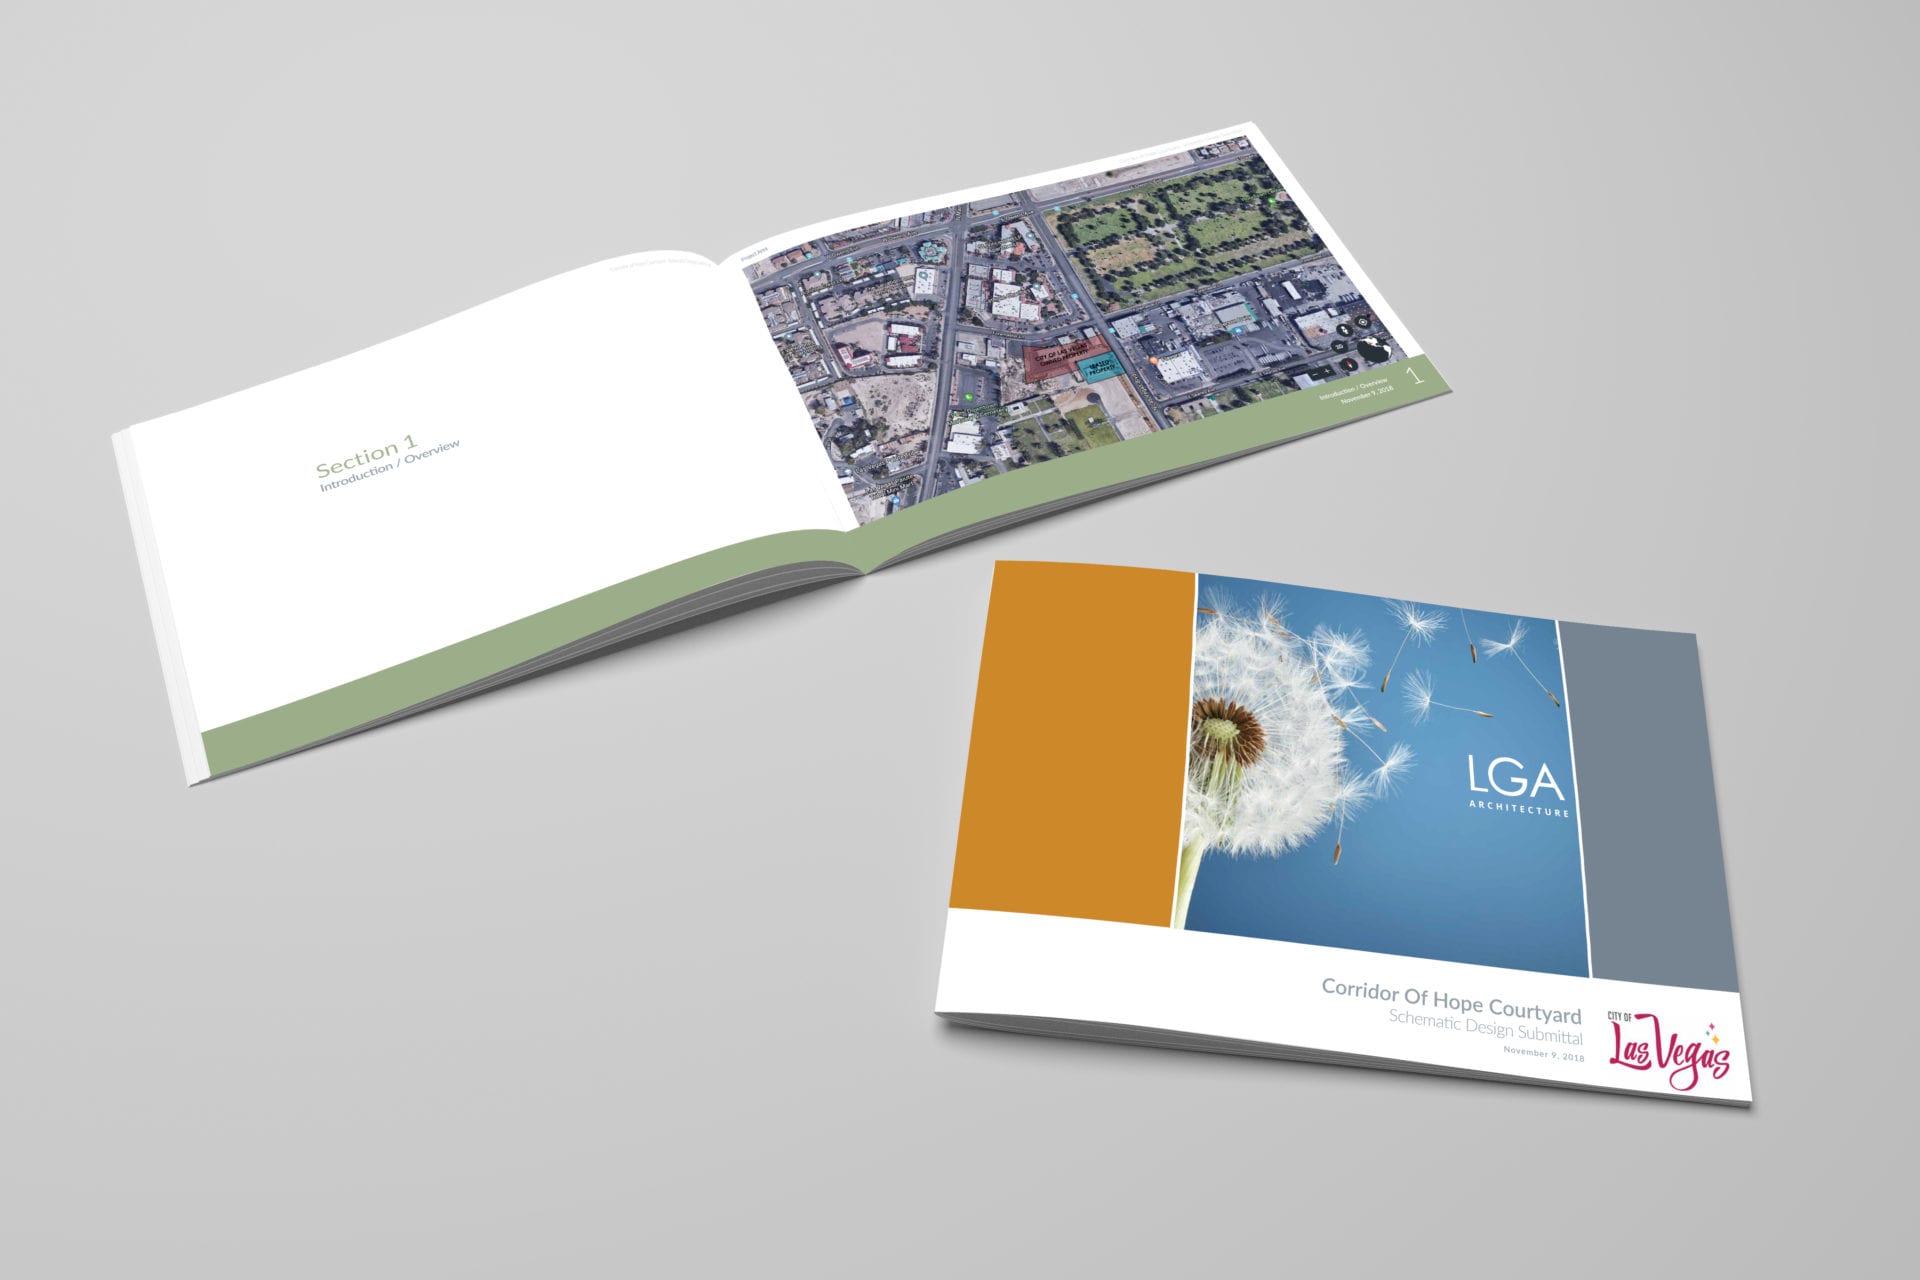 A magazine of schematic designs by LGA Architecture, graphic design by Canyon Creative.